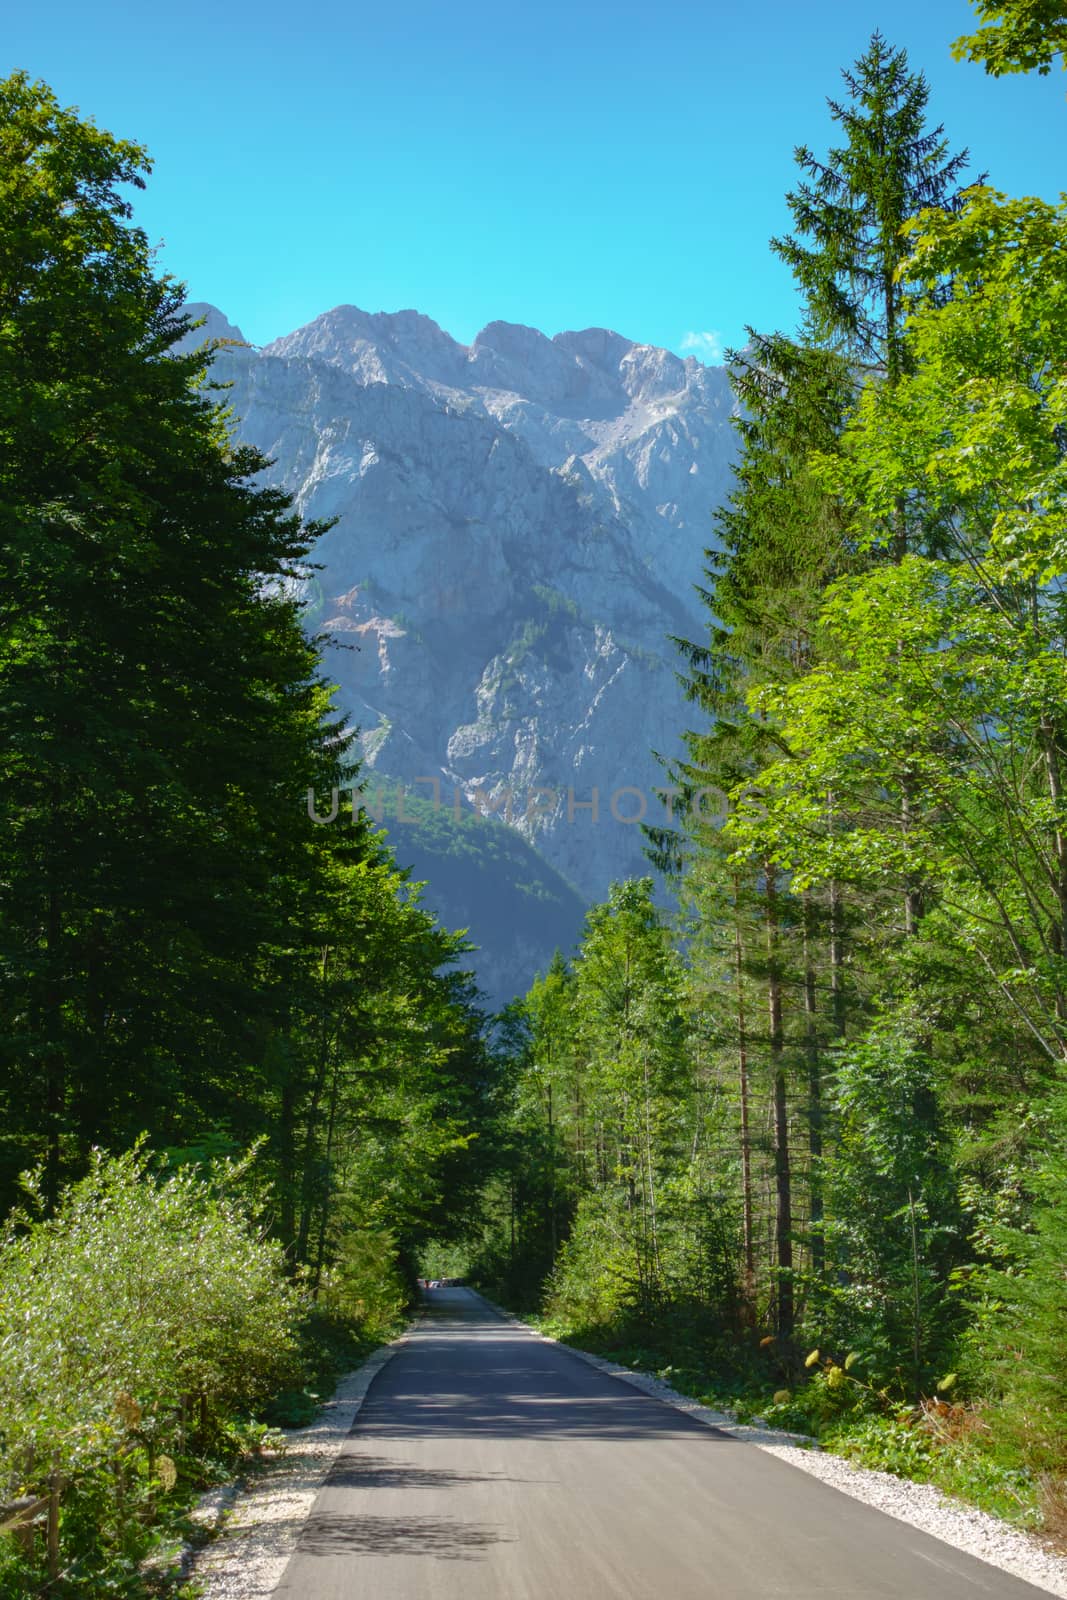 Alpine road leading into a valley on a sunny day, mountains in background, Logarska Logar valley, Slovenia, European Alps